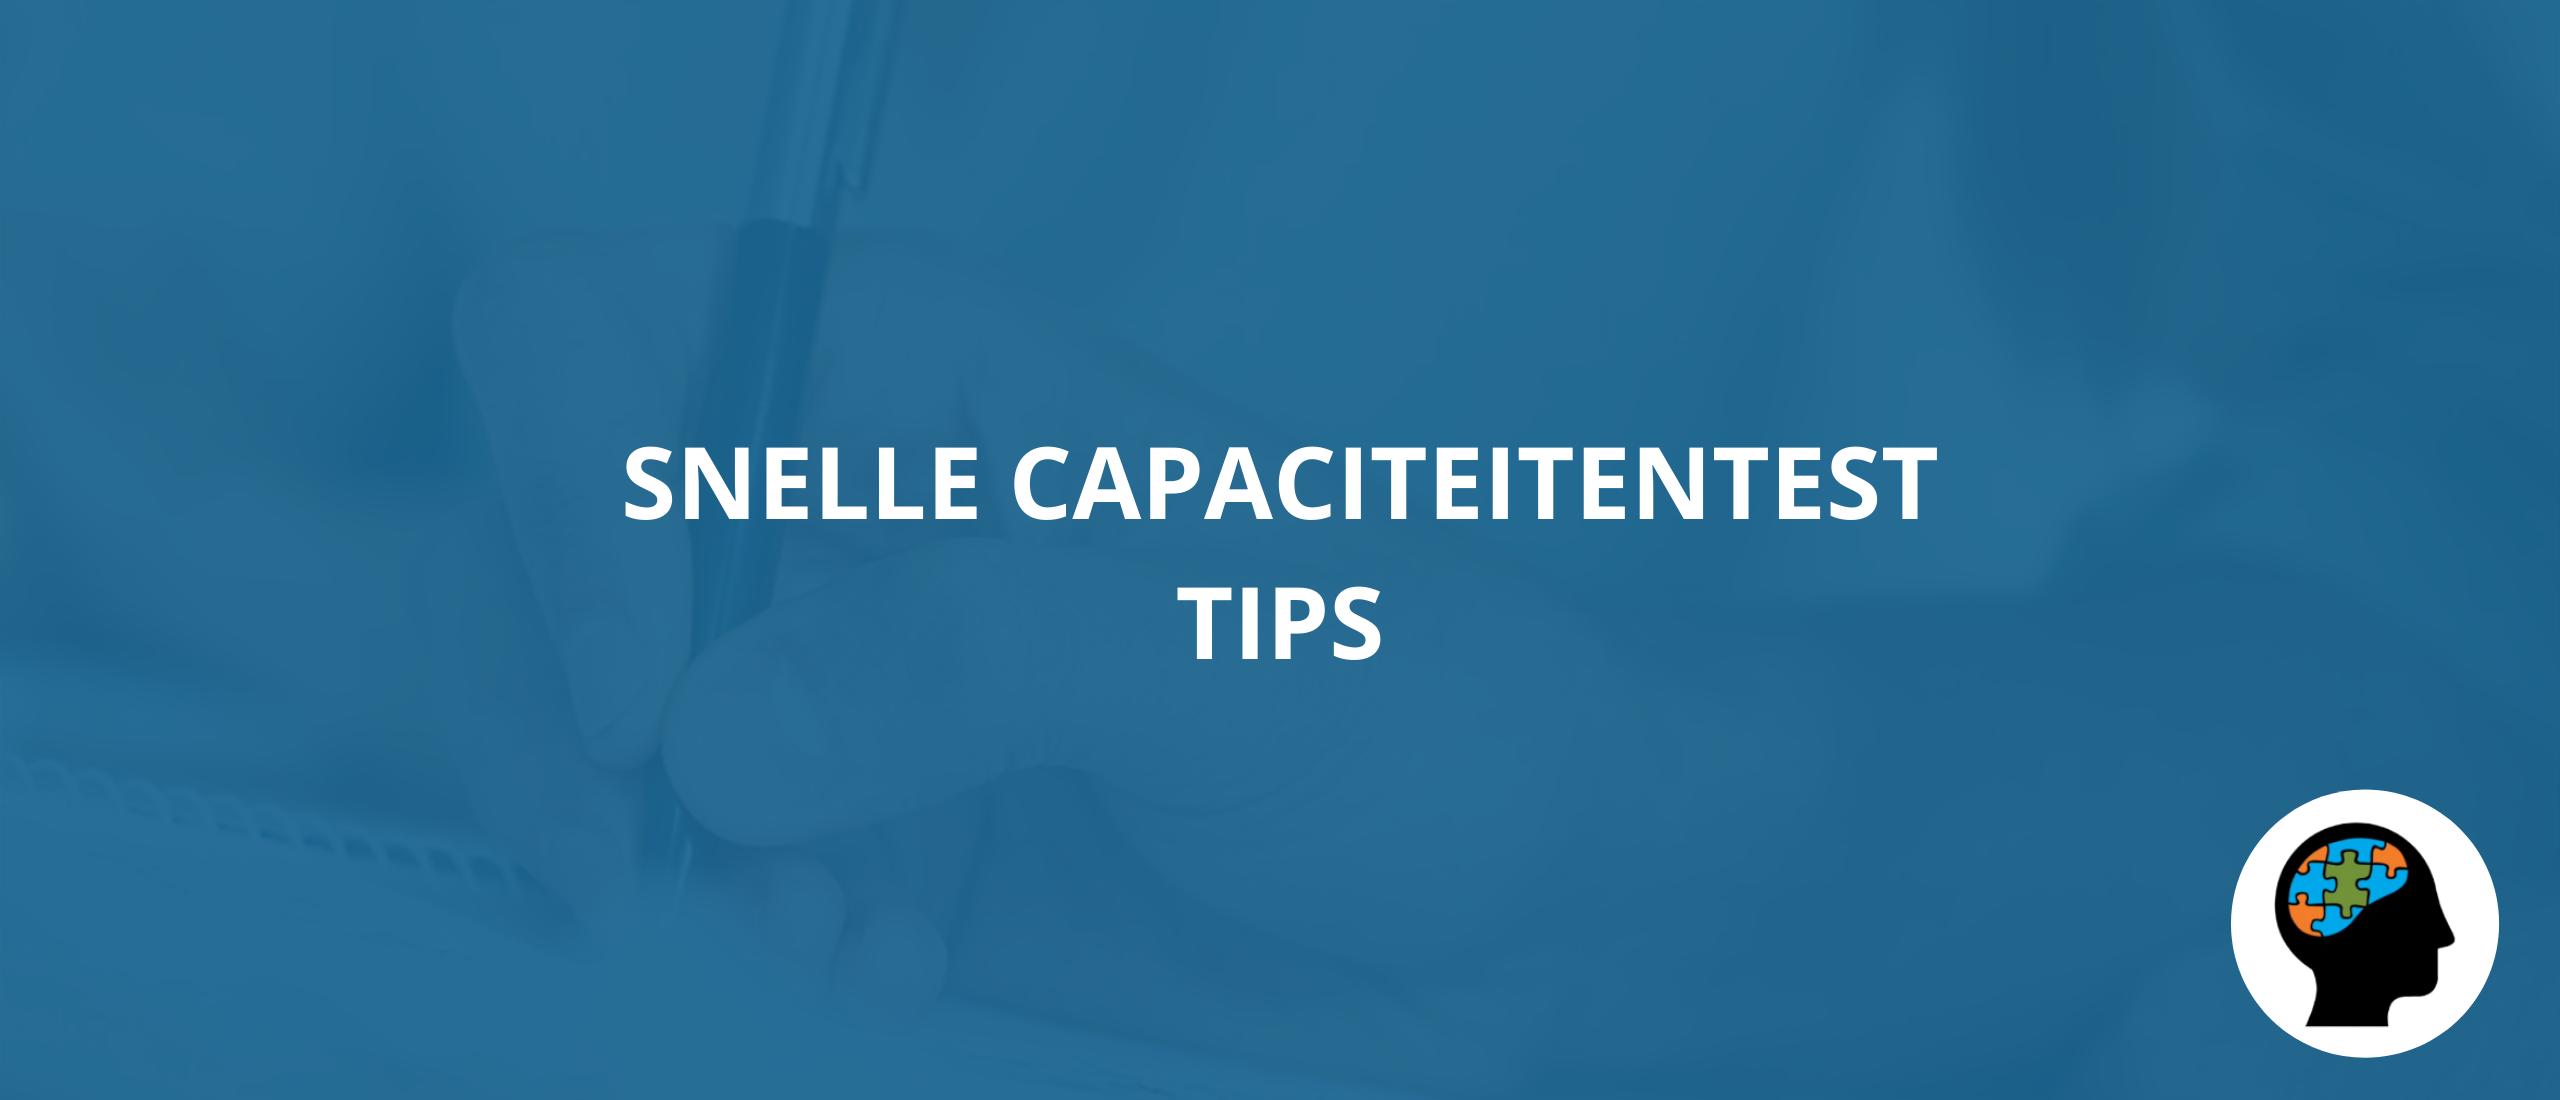 Snelle capaciteitentest tips